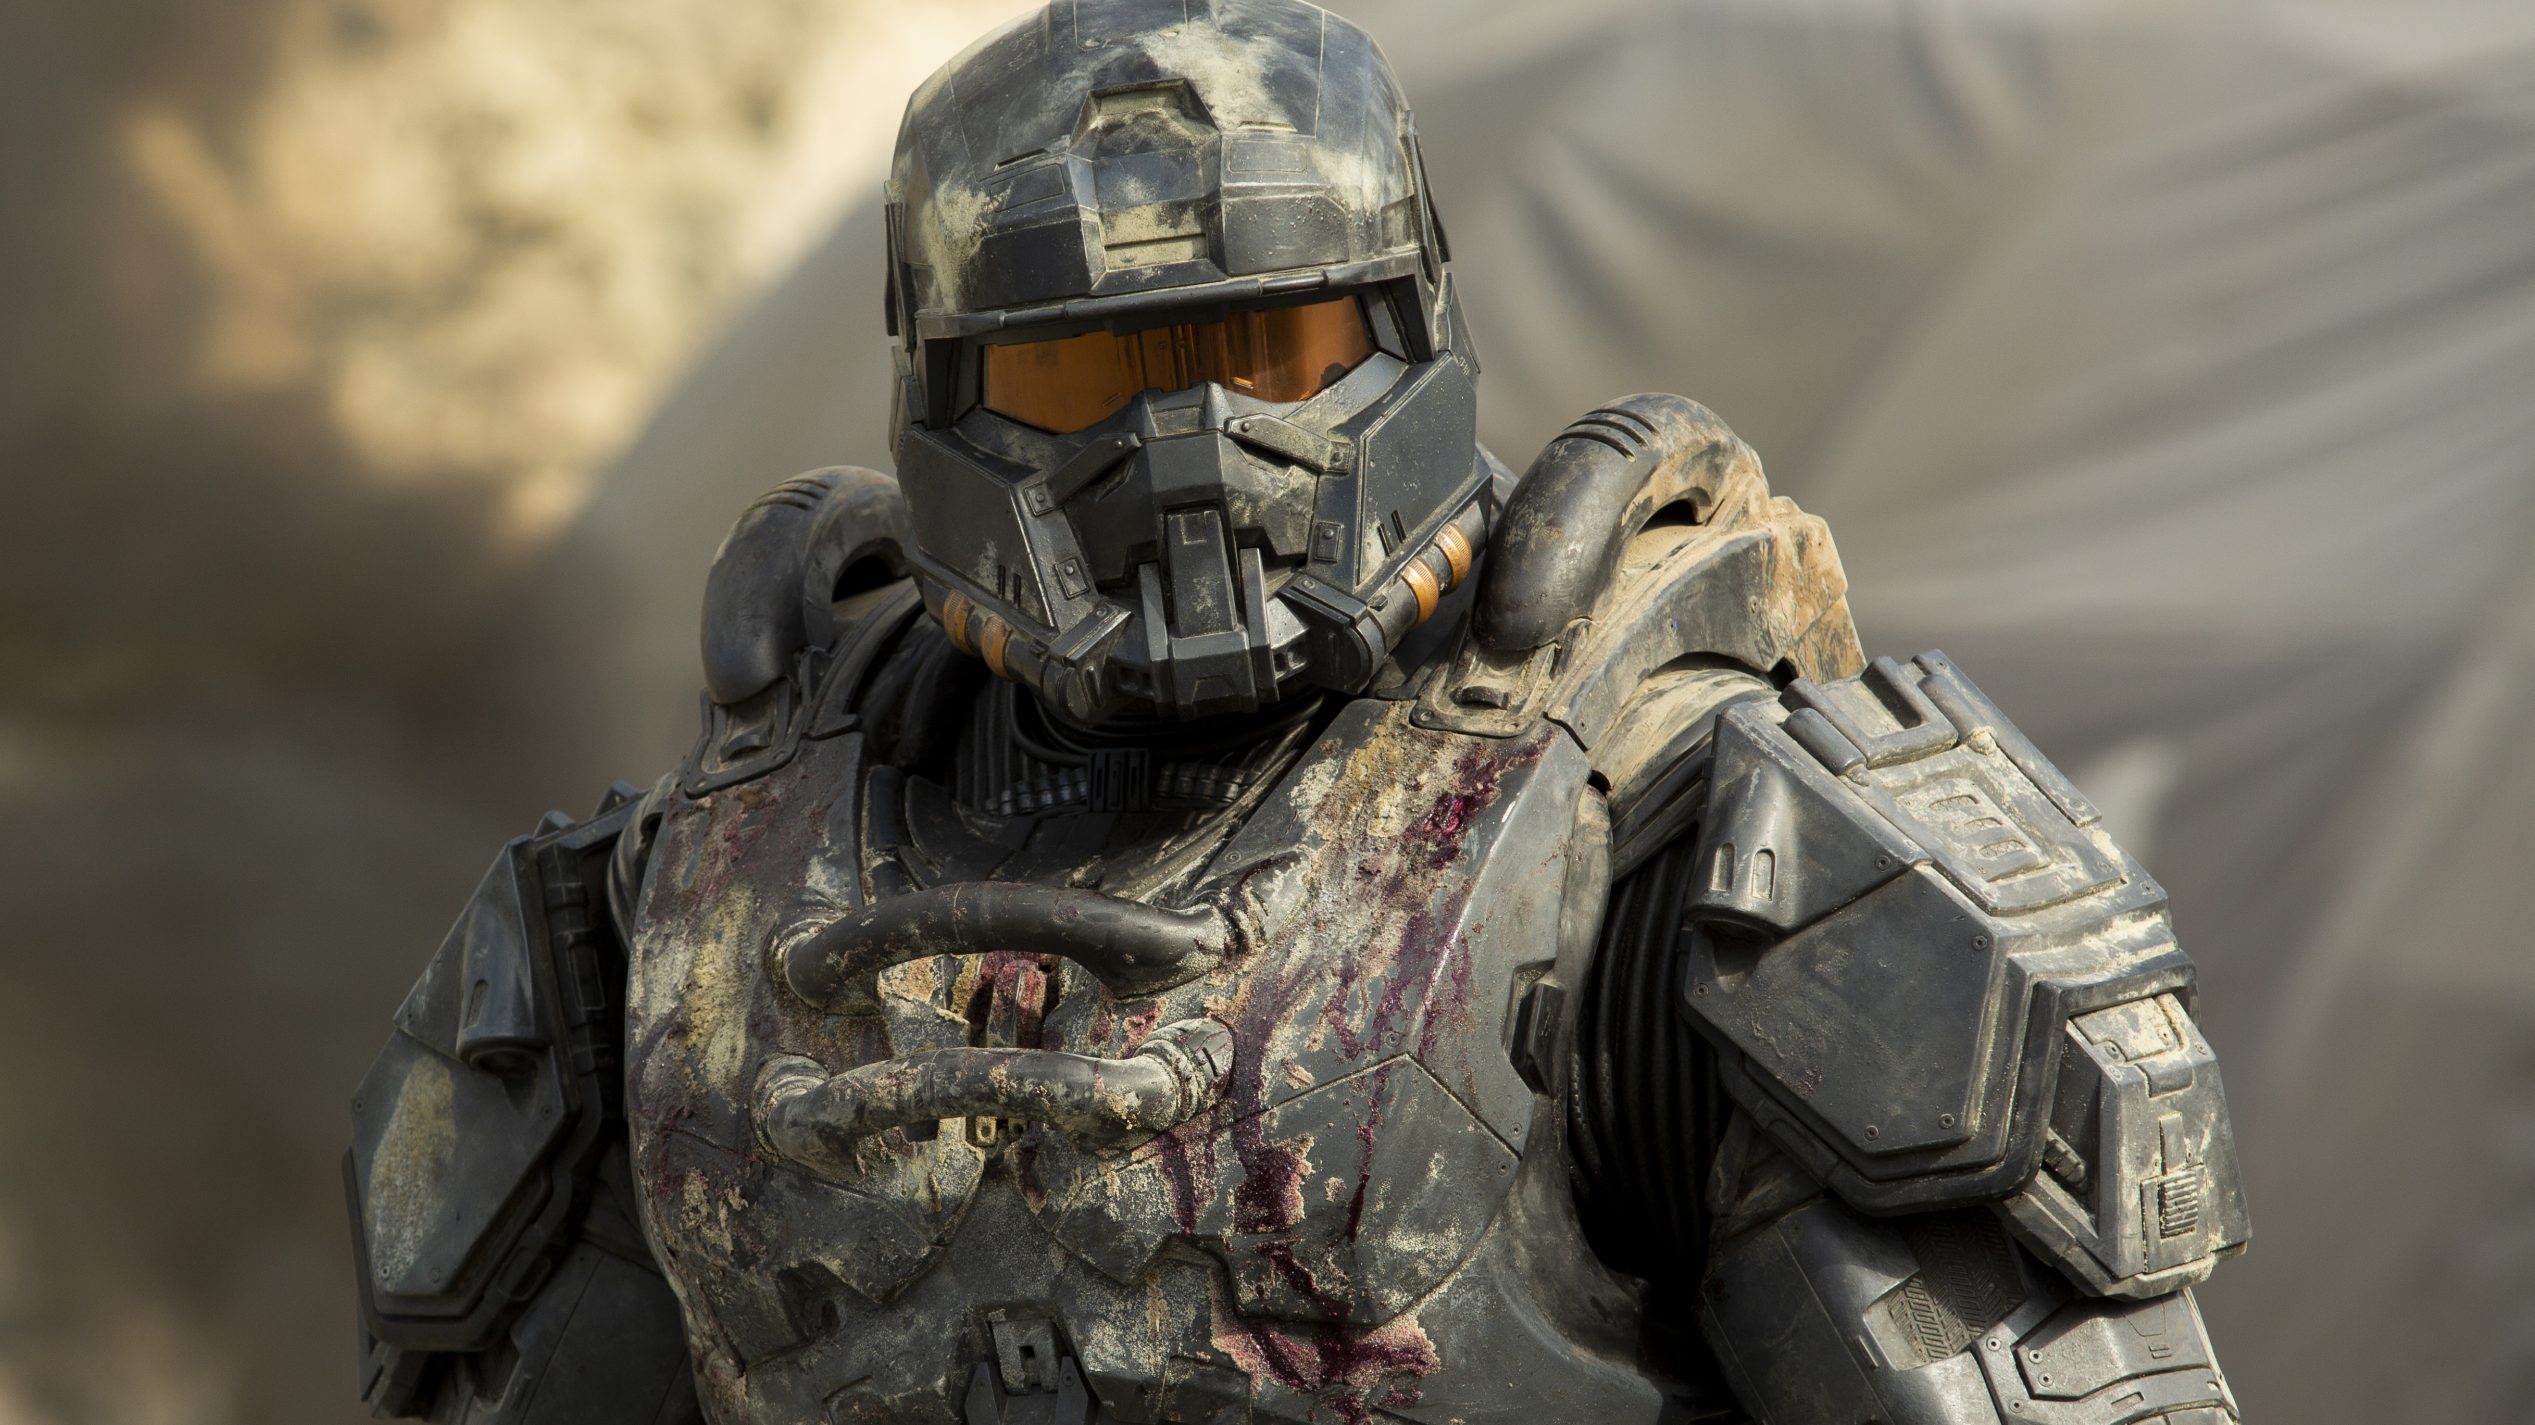 You can now watch Paramount Plus' live-action Halo TV show for